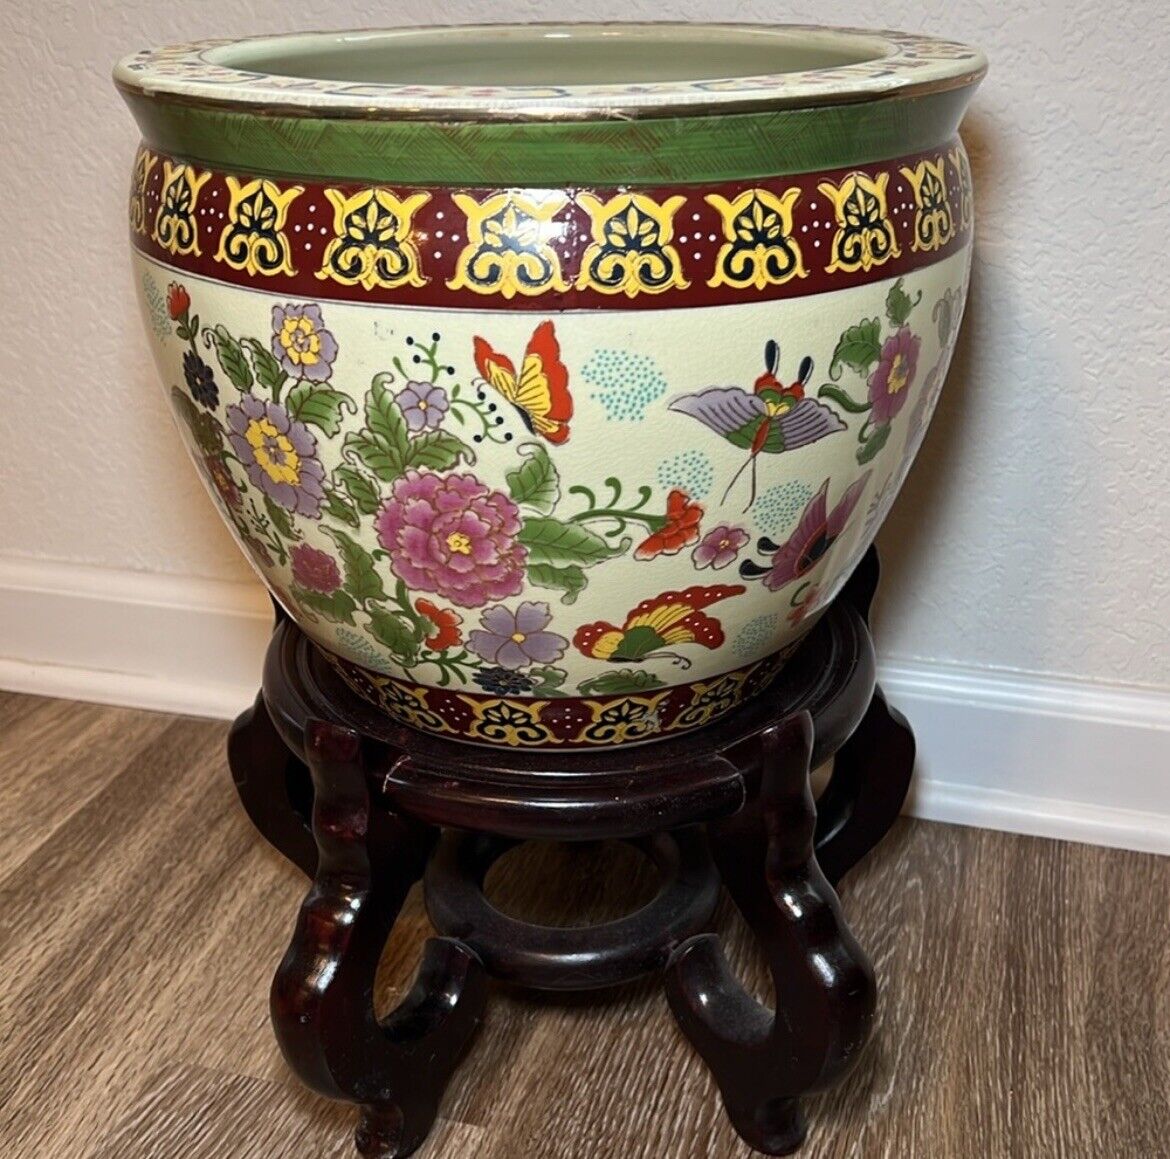 Large VTG Chinese Koi Fish Bowl Planter Butterflies Floral Gold Polychrome Nice